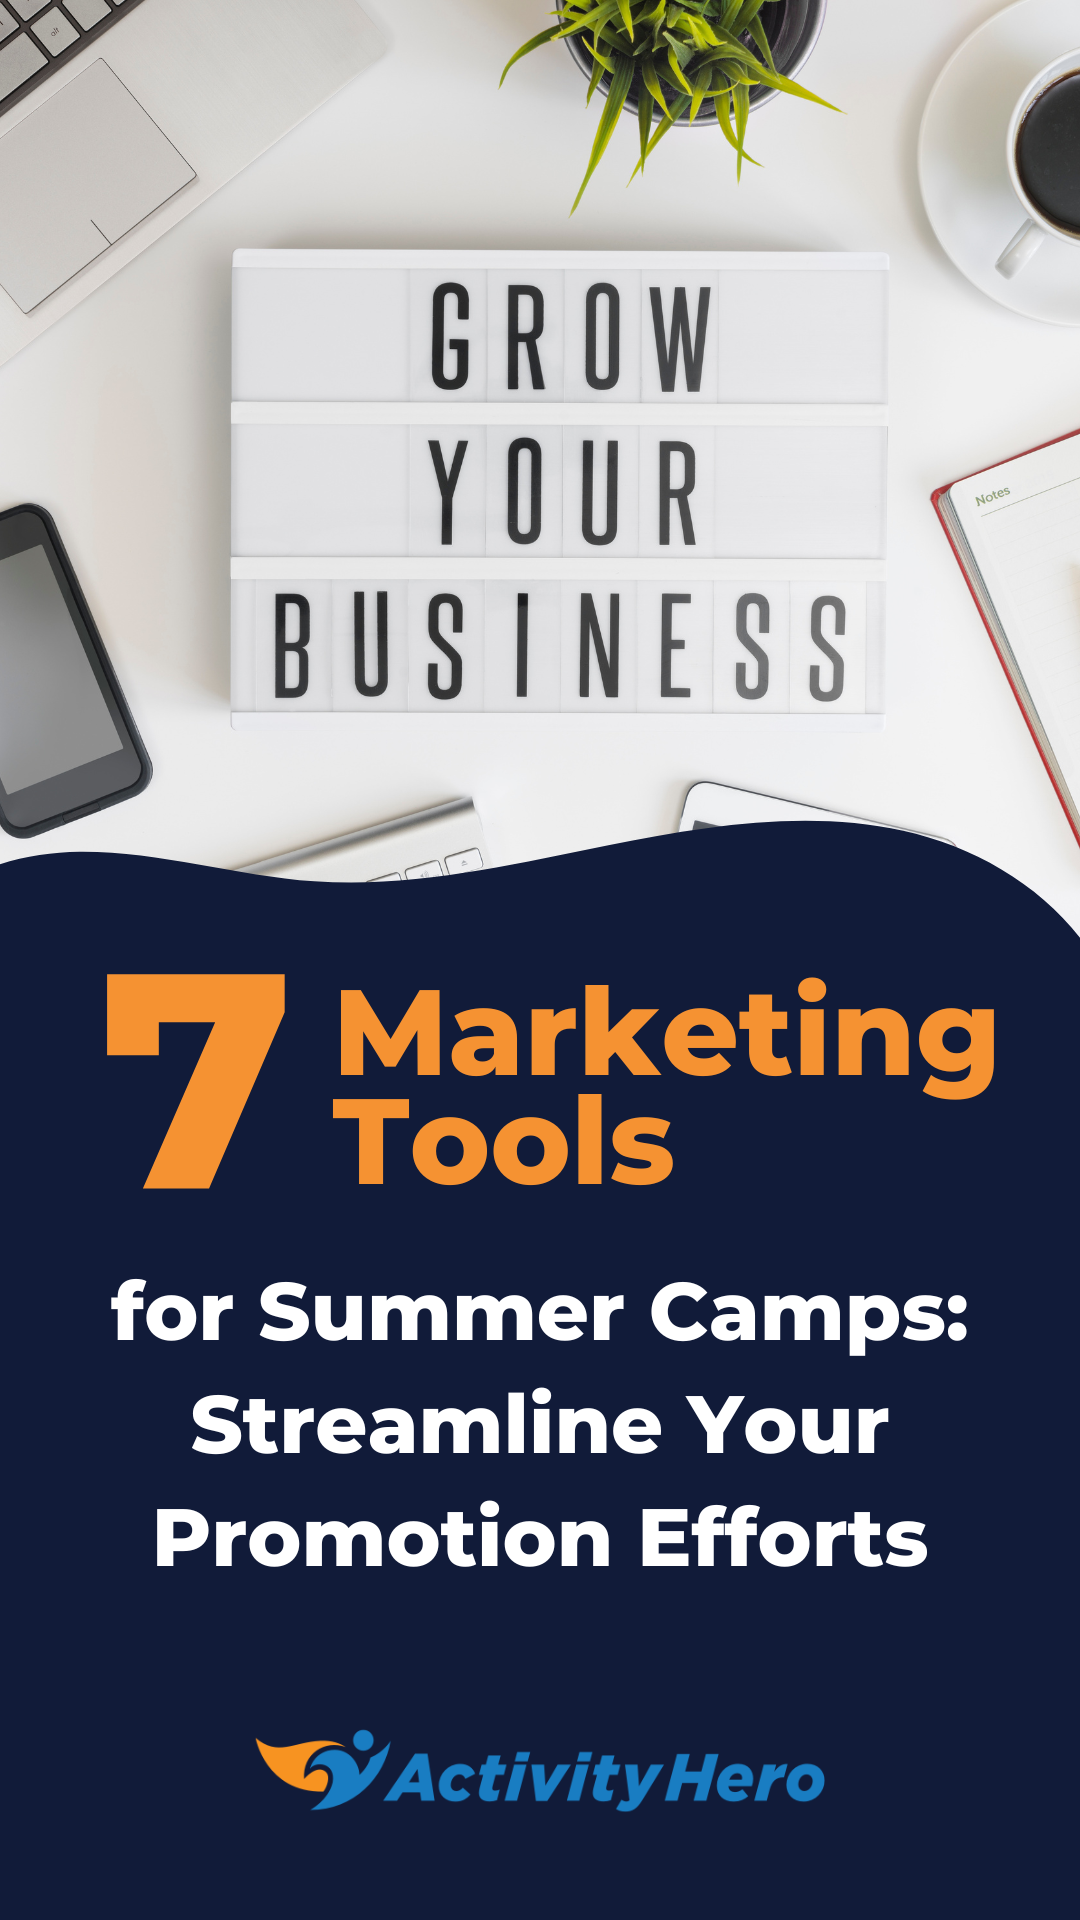 7 Marketing Tools for Summer Camps: Streamline your Promotion Efforts